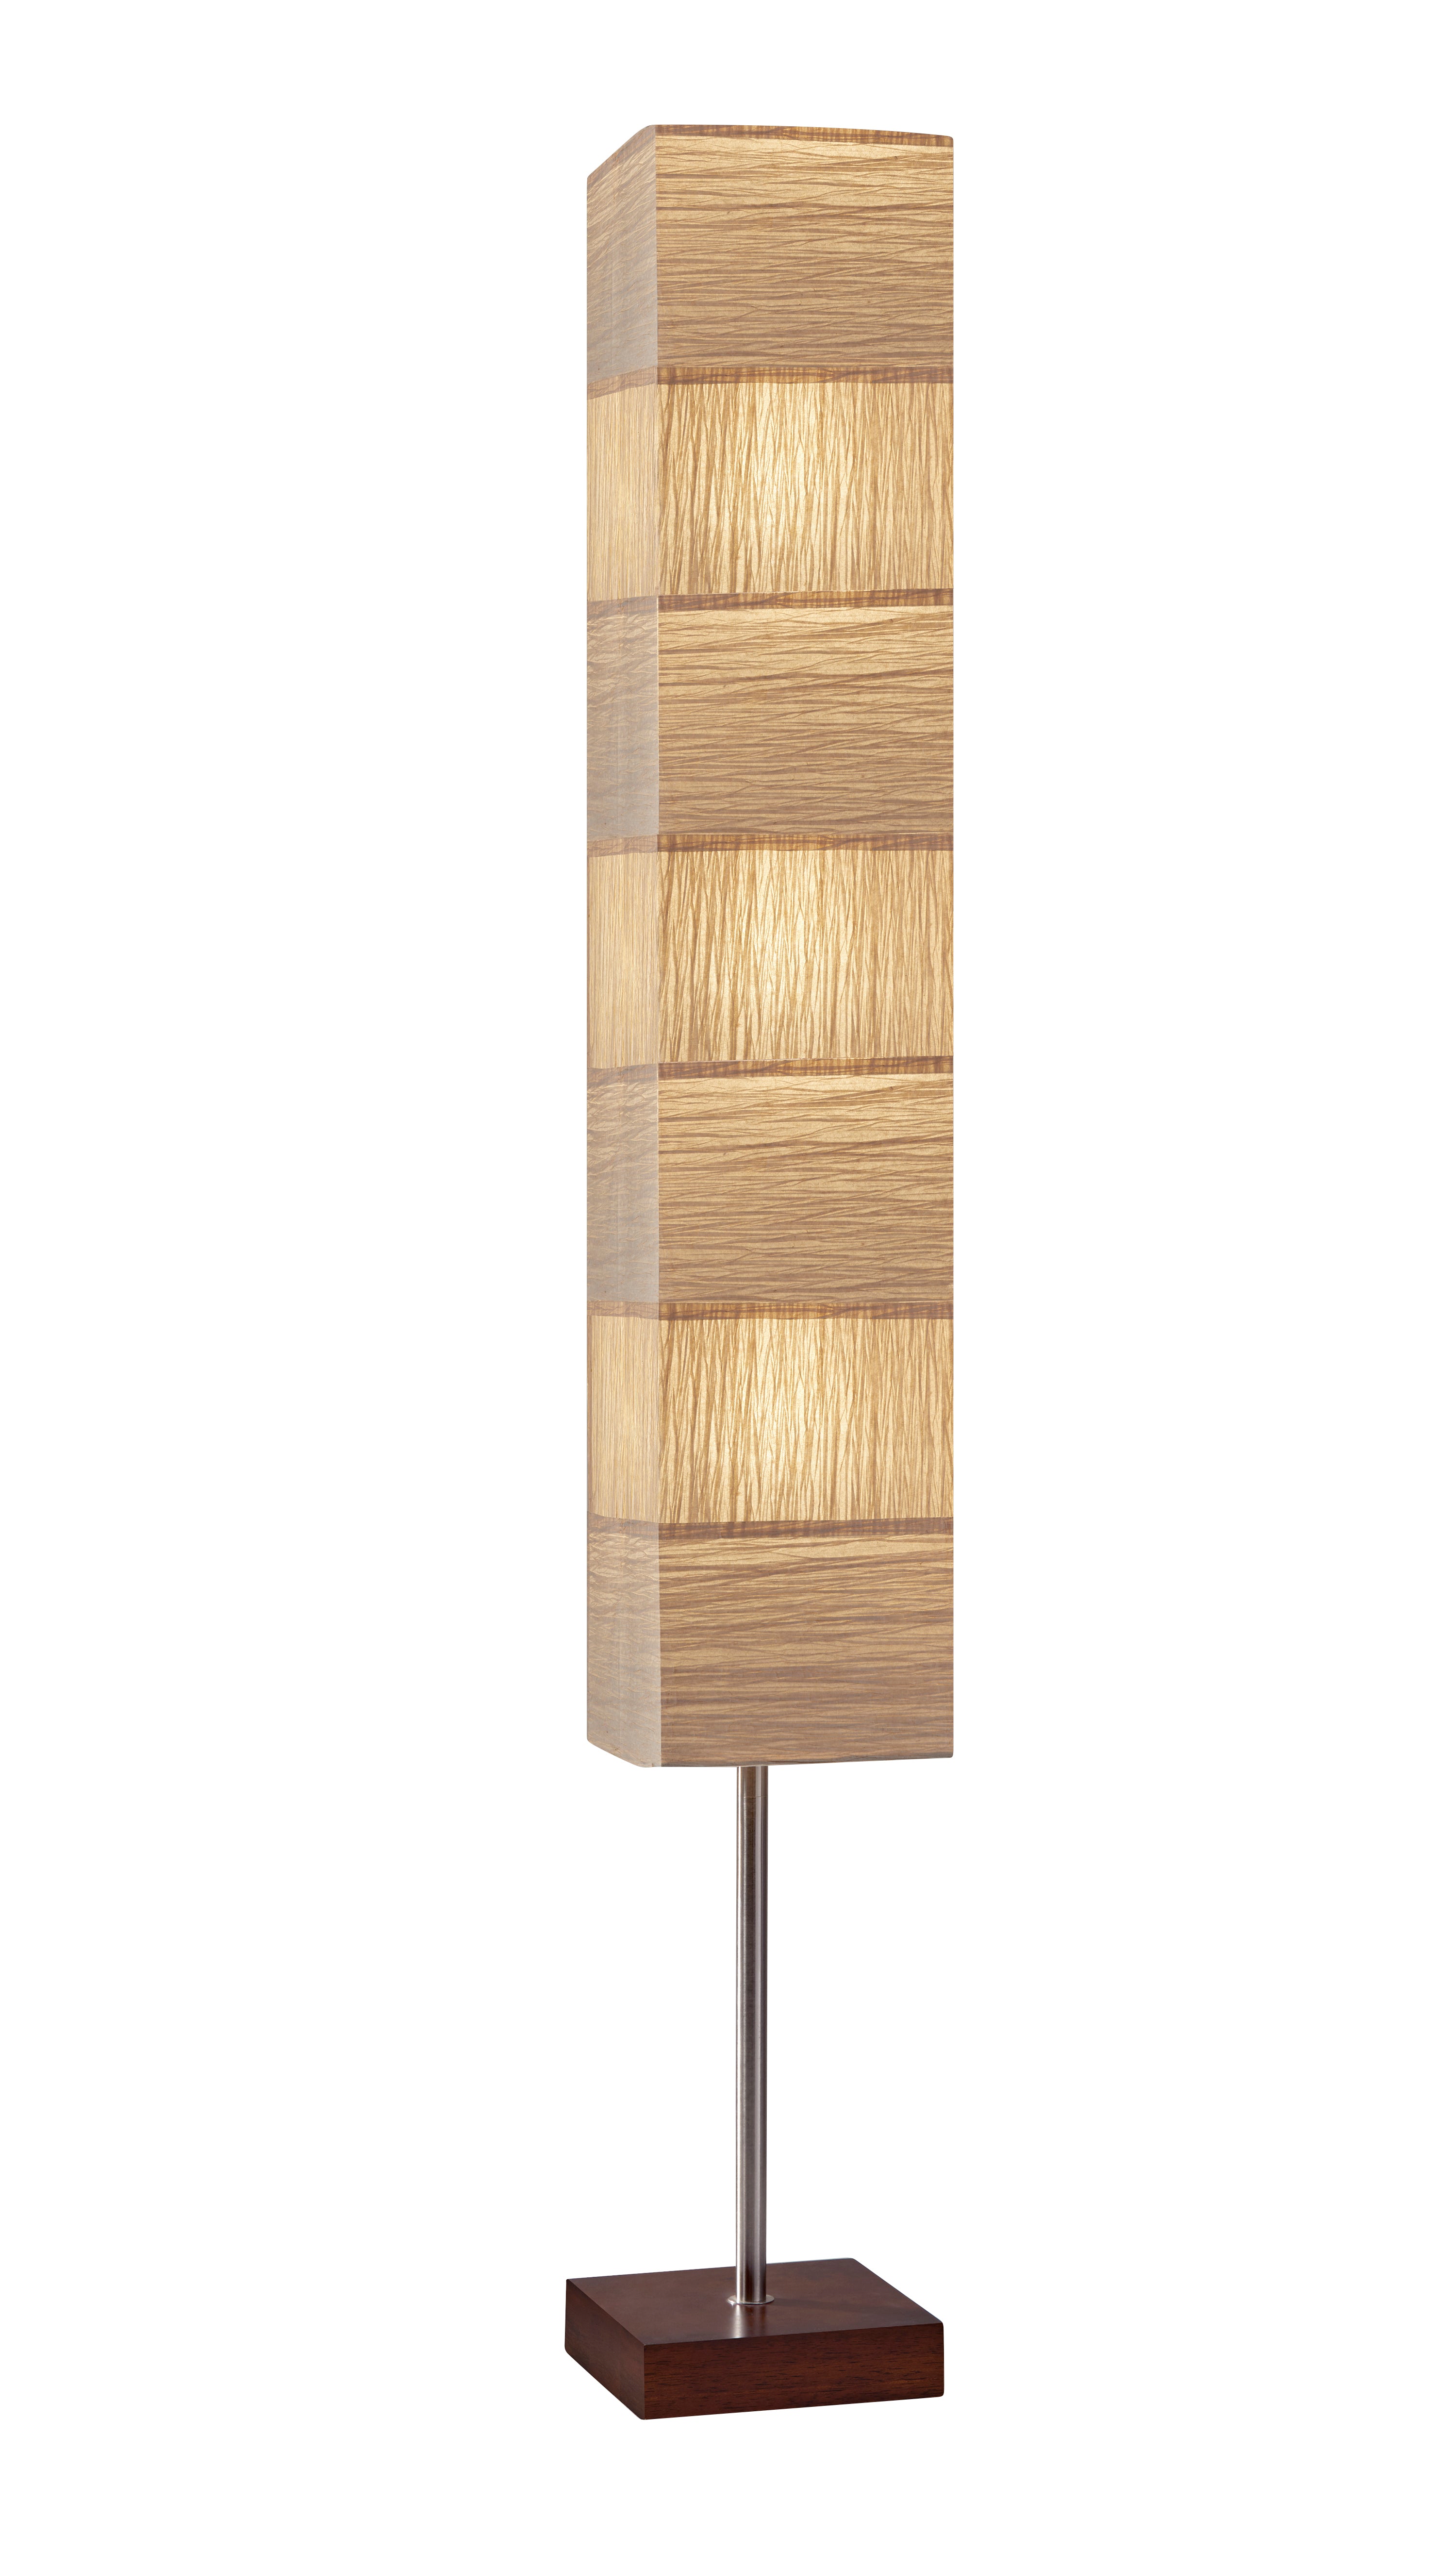 LED CHARGING Floor lamp Stainless steel - 8027-15 | ADESSO